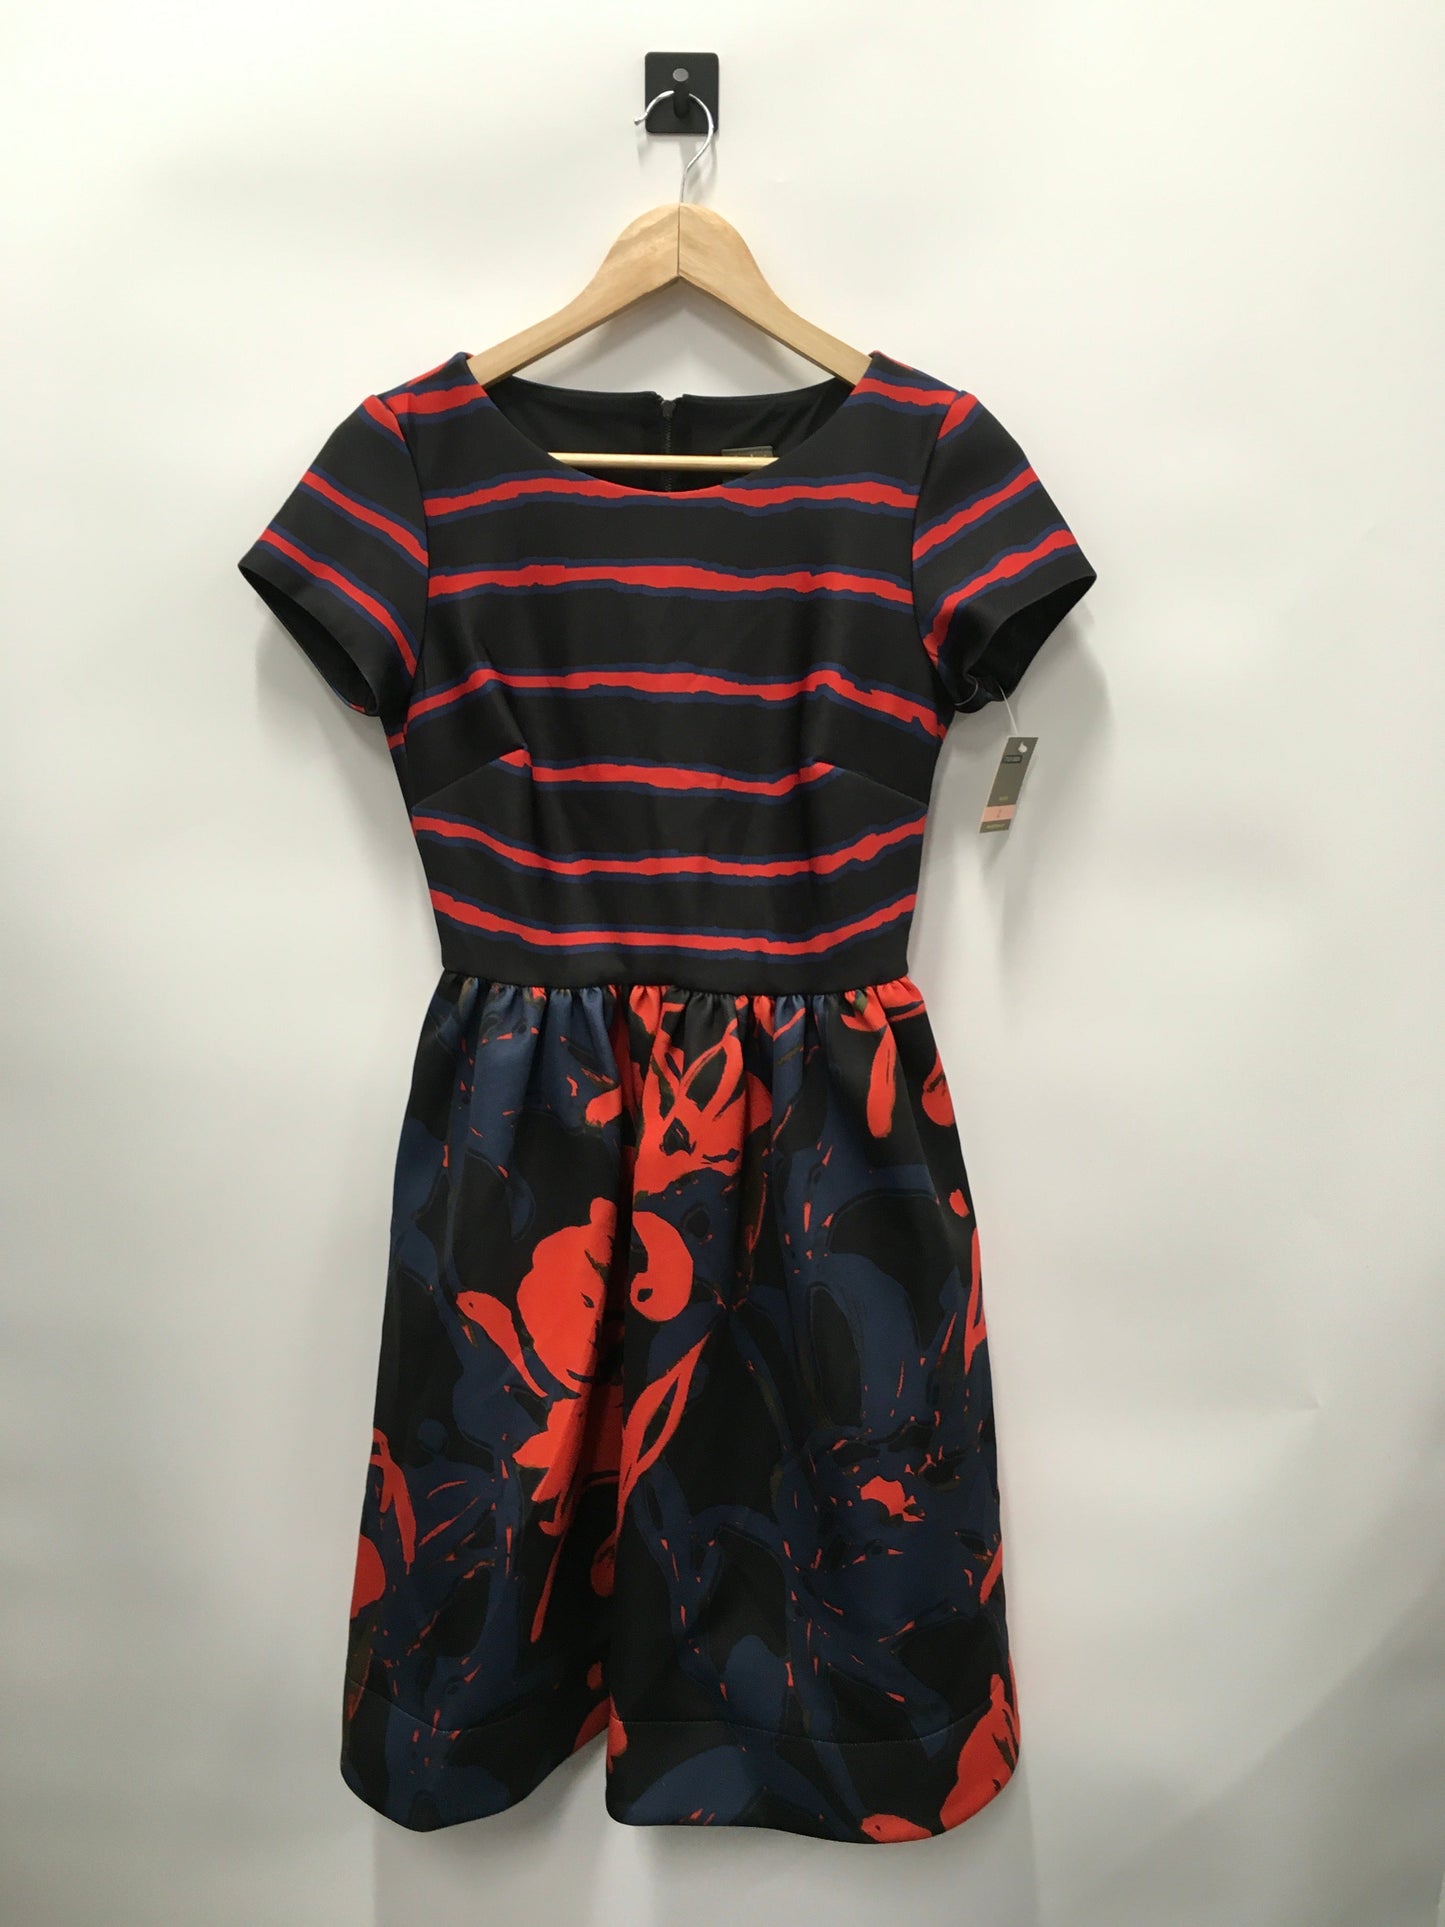 Black & Red Dress Party Short Taylor, Size S